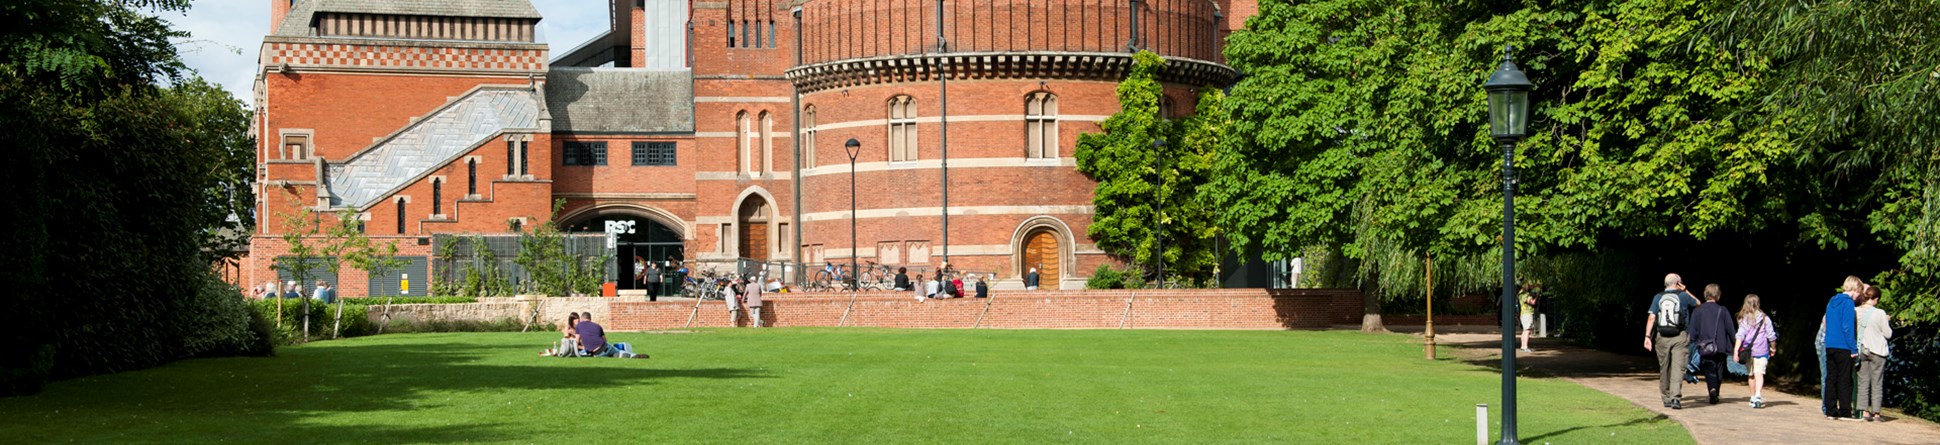 View to the Royal Shakespeare Theatre, Stratford-upon-Avon, from the south-west.